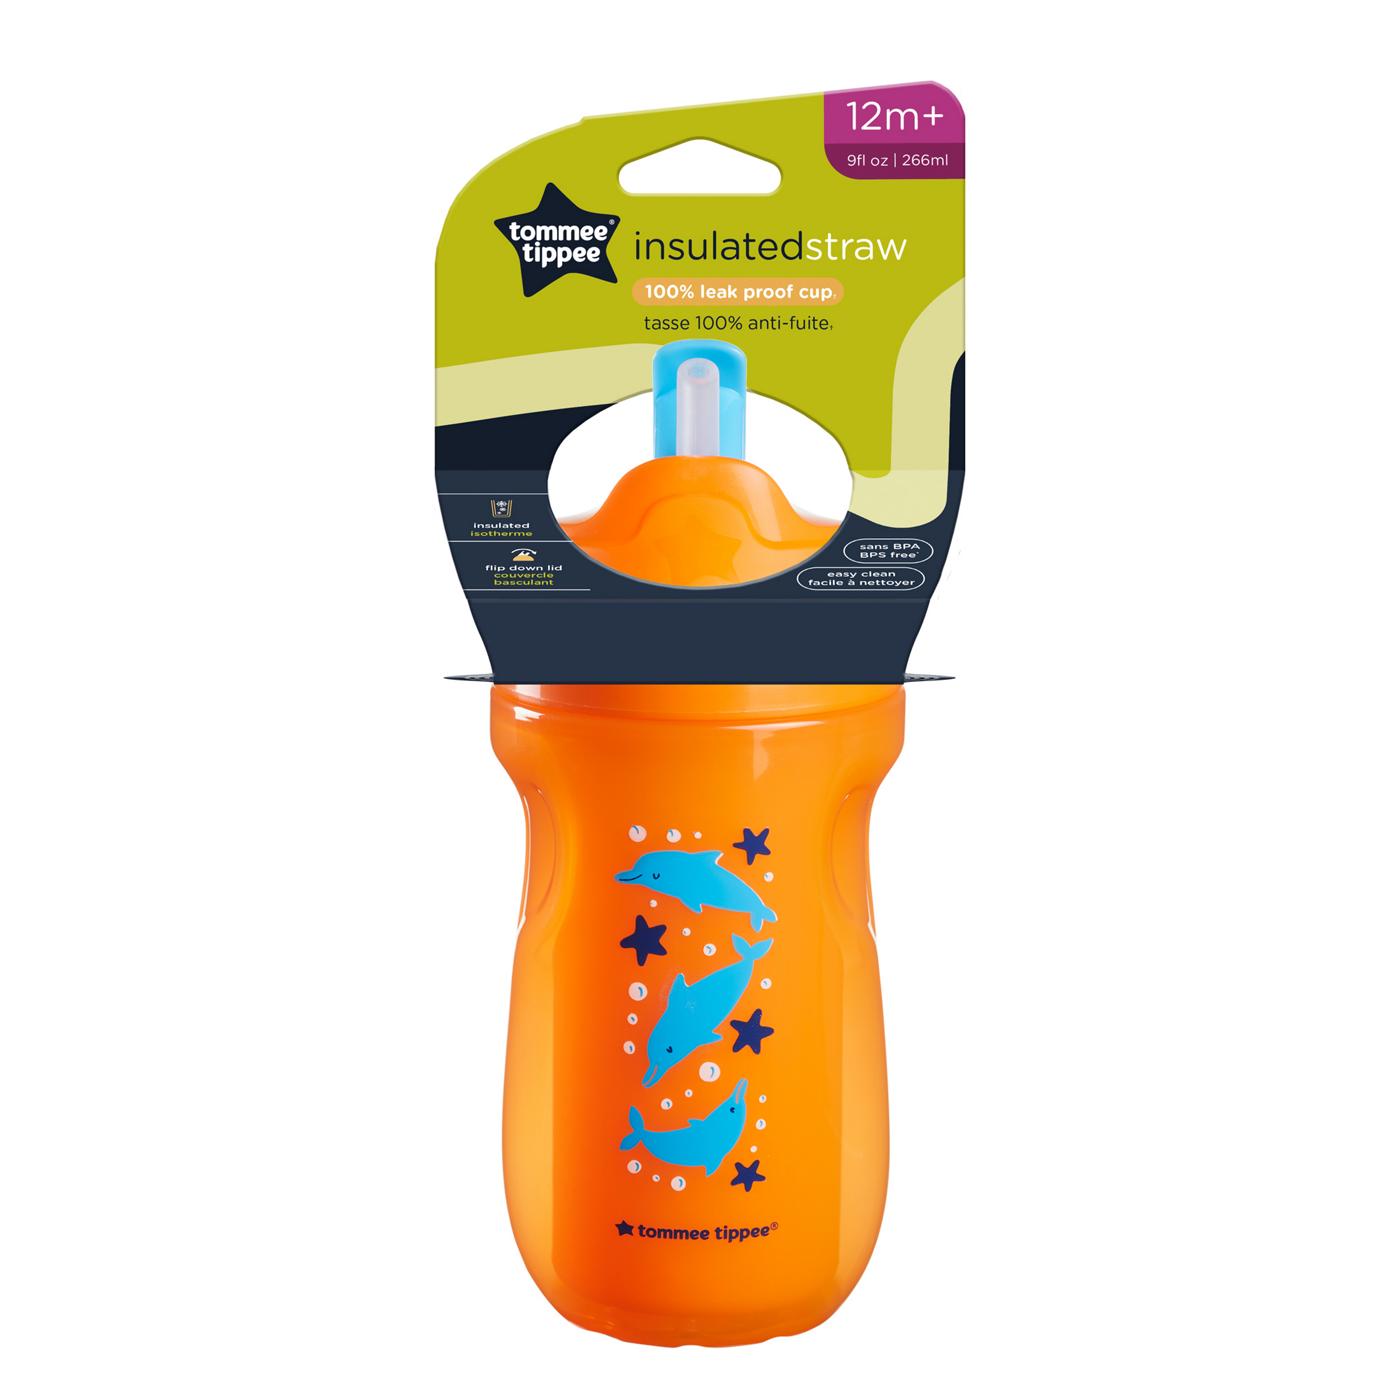 Tommee Tippee Insulated Straw Cup - Assorted Colors; image 2 of 4